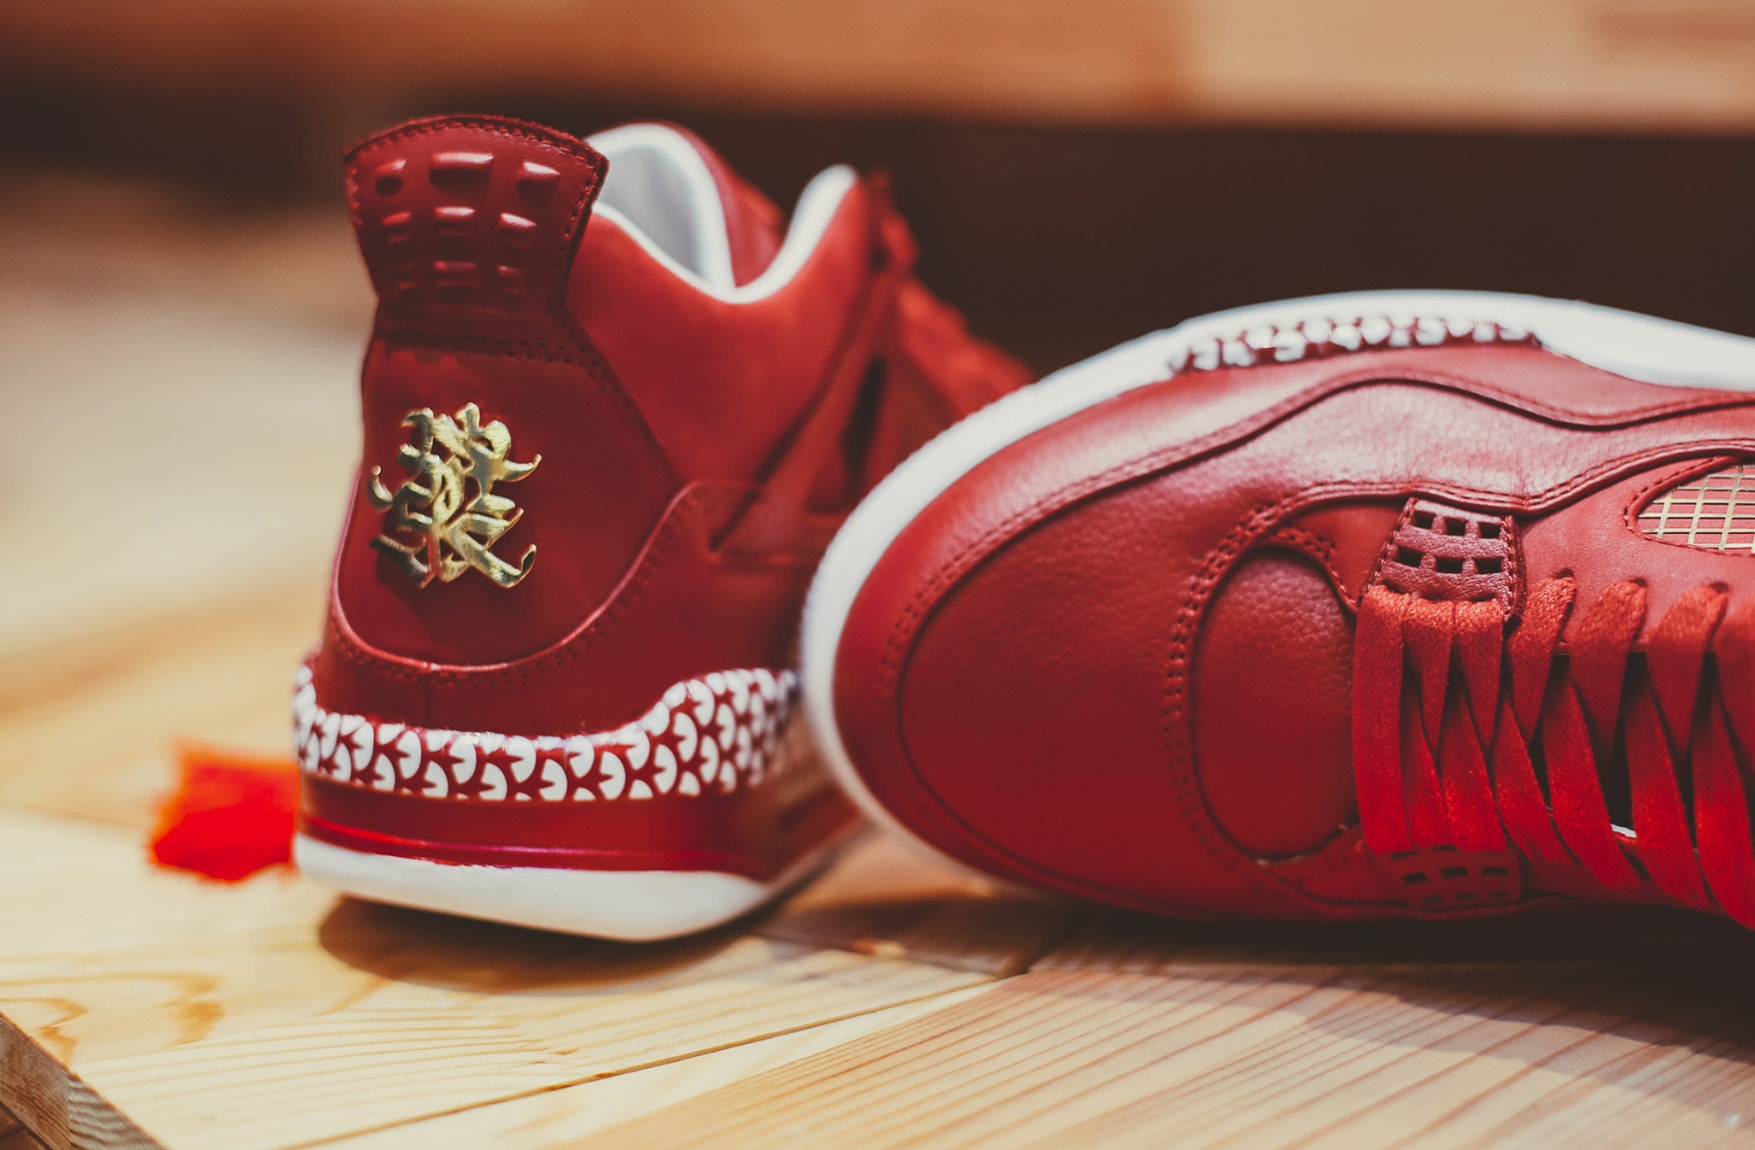 The Remade 400ml Air Jordan 4 Chinese New Year